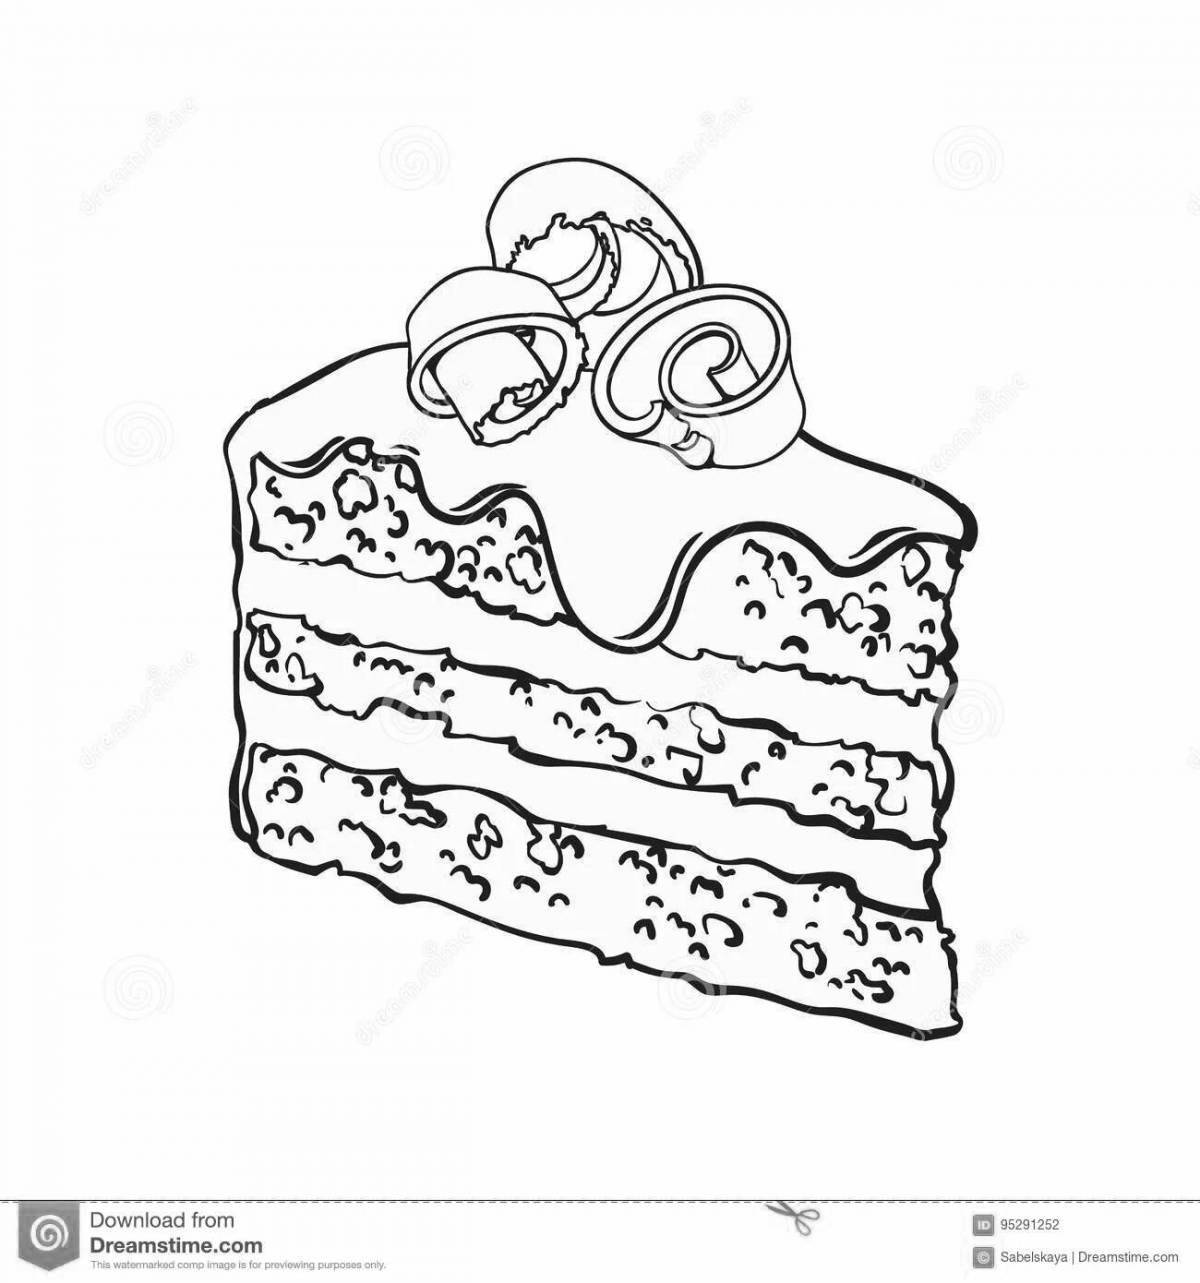 Coloring page chocolate cake with nut filling